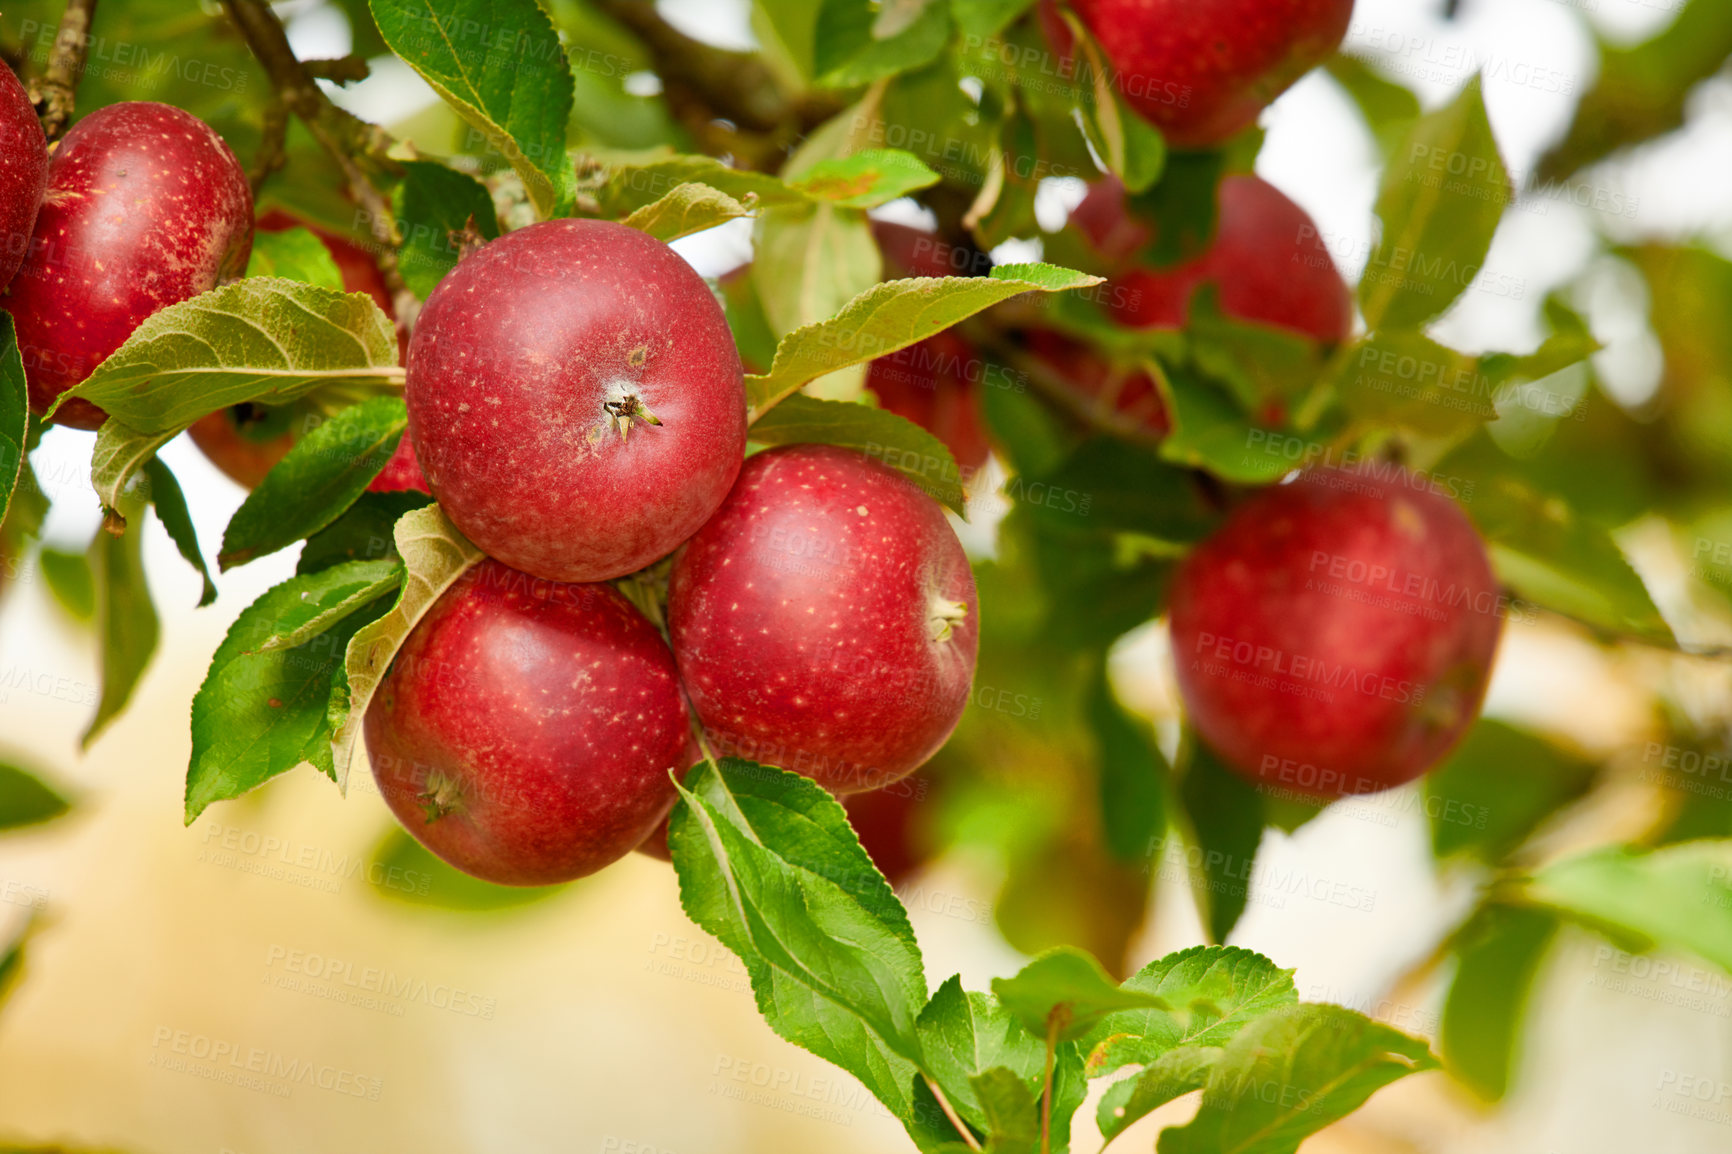 Buy stock photo Red apples growing on trees for harvest in an orchard outdoors. Closeup of ripe, nutritious and organic fruit cultivated in season on a lush farm or grove. Delicious fresh produce ready to be picked